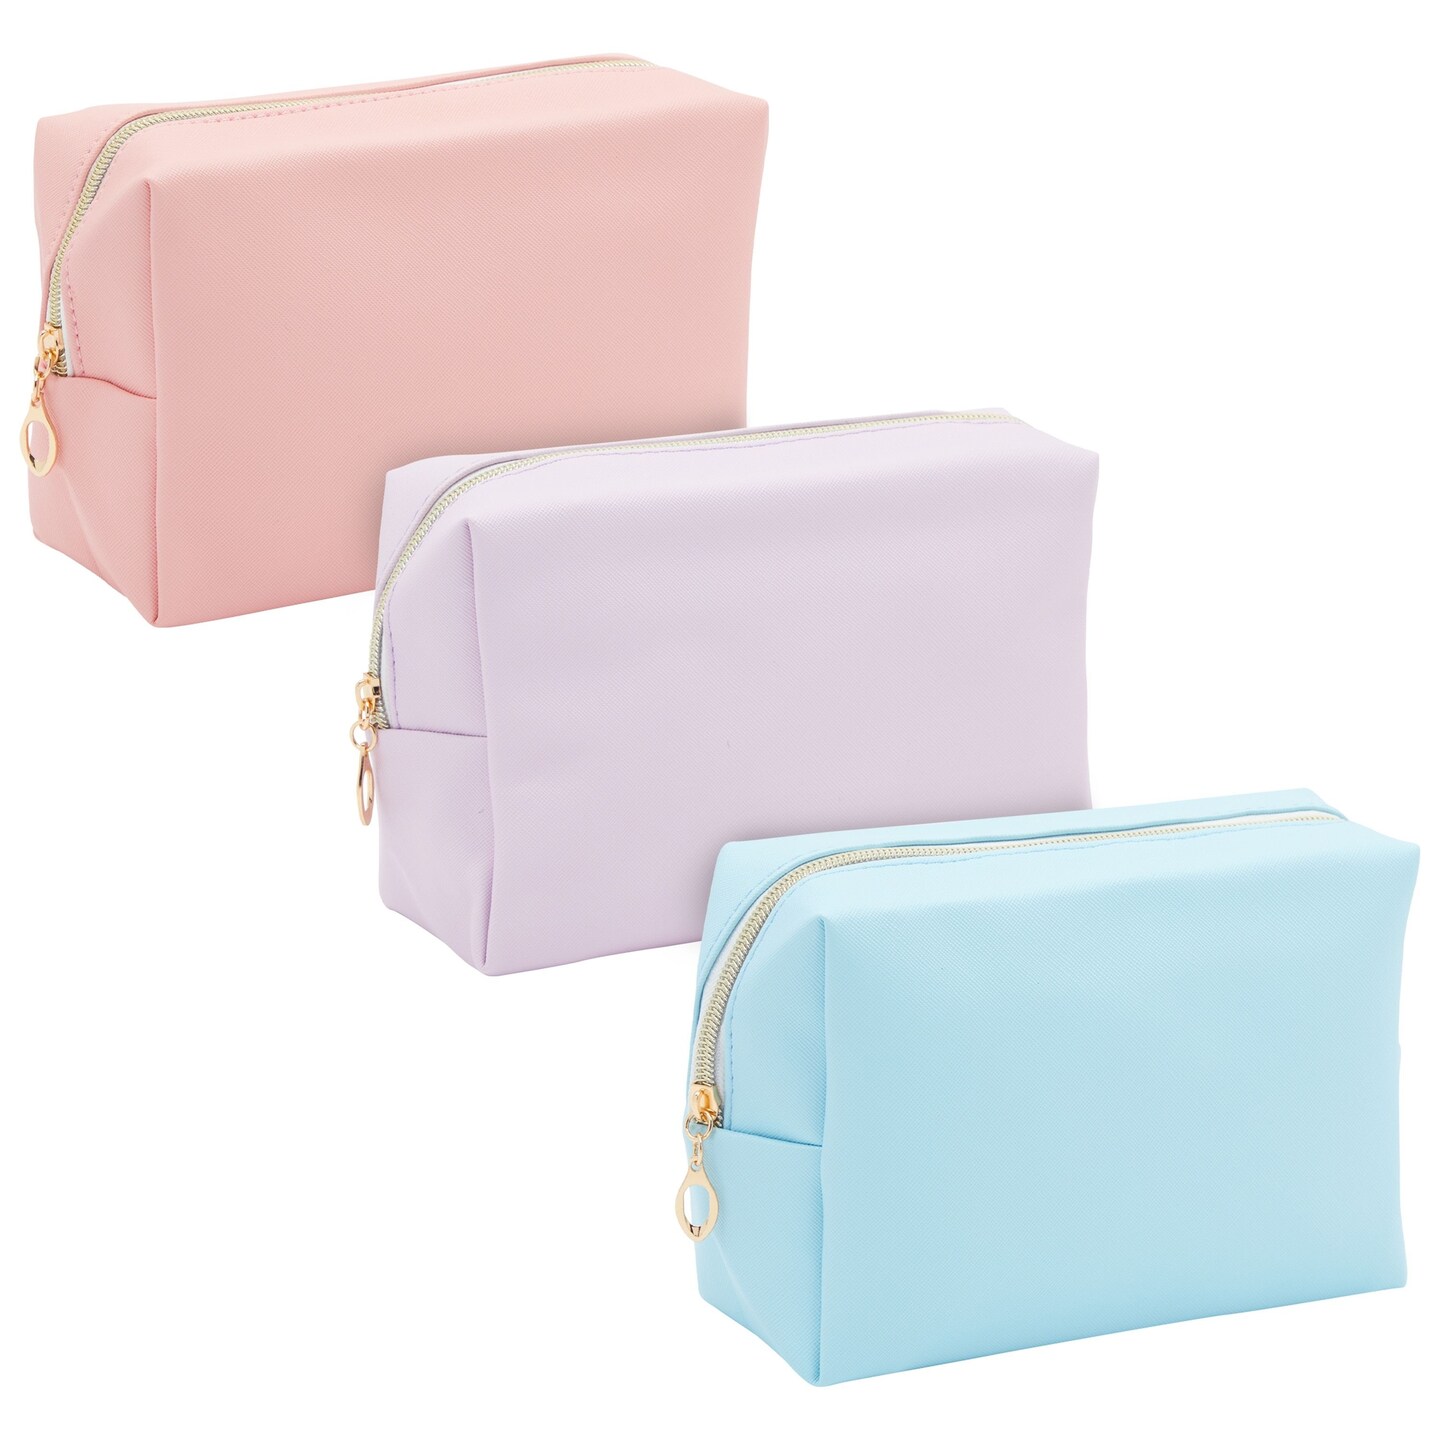 3 Pack Faux Leather Makeup Bag with Zipper - Small Cosmetic Pouch for Travel and Cosmetic Organizer (3 Pastel Colors)